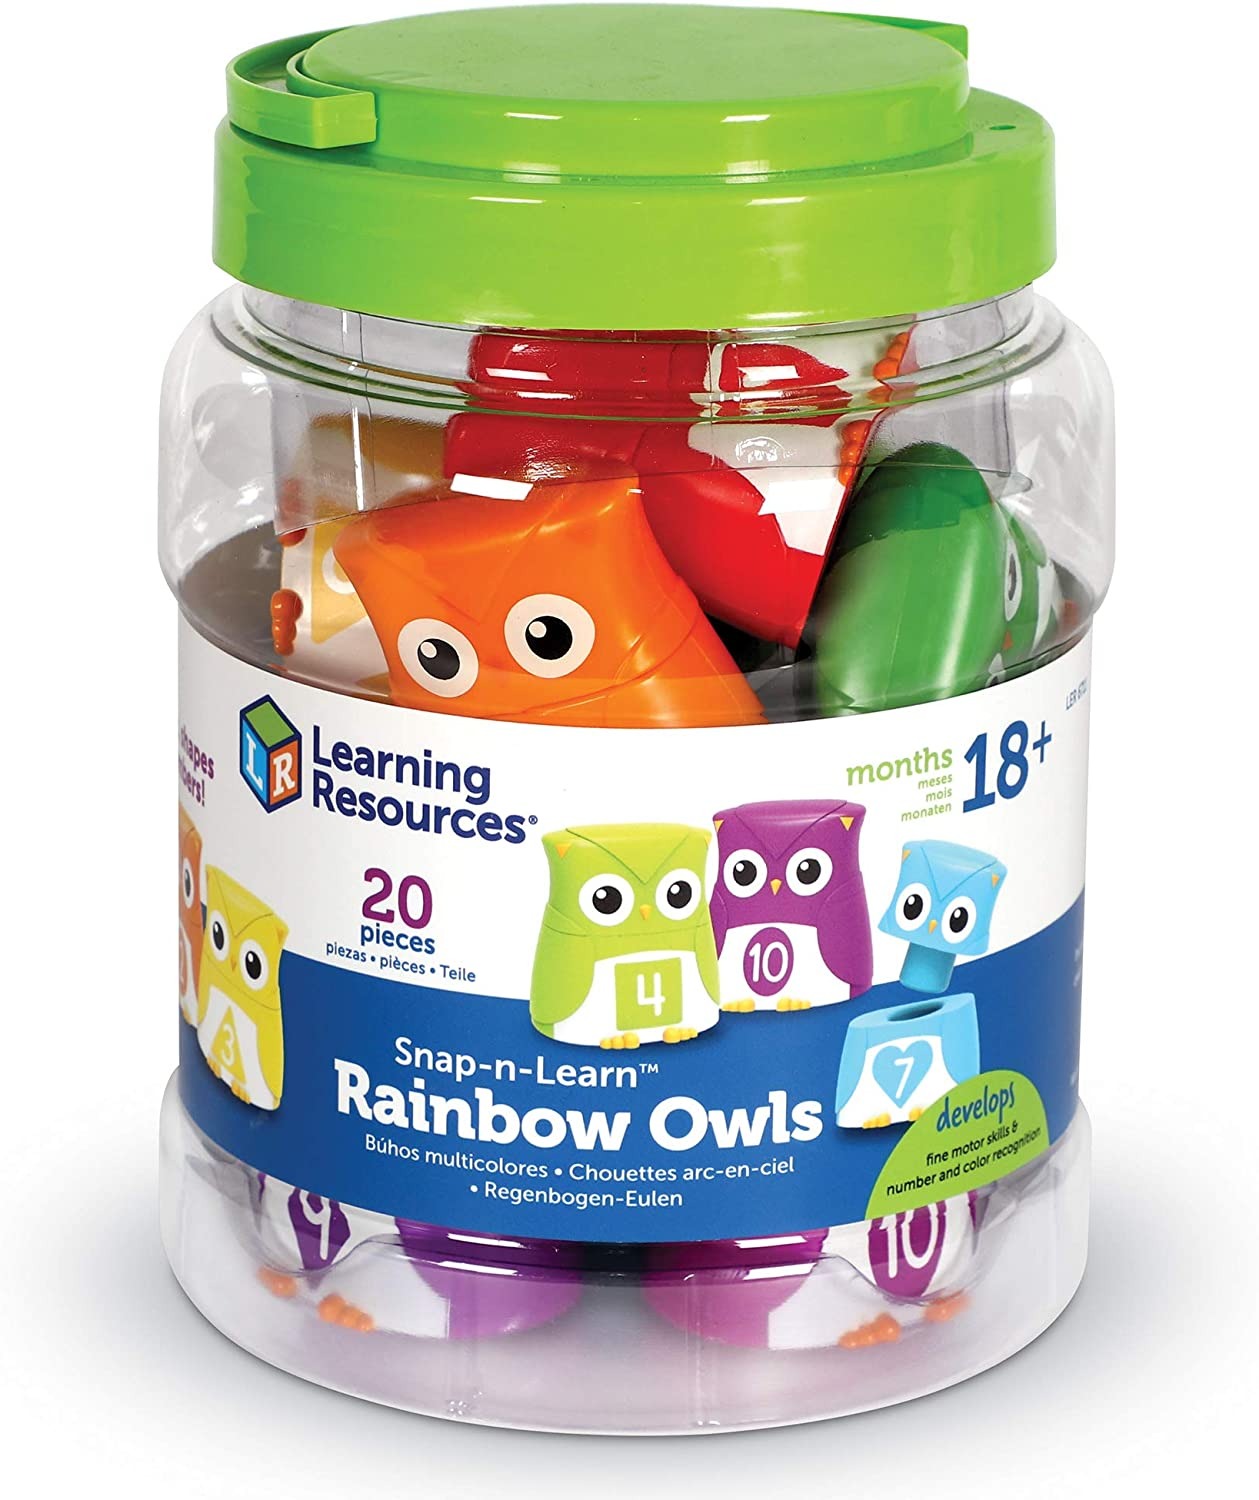 Snap-n-Learn Owls, These fun Snap-n-Learn Owls flew over the rainbow! Introduce toddlers to early colour, shape, and number skills with the Snap-n-Learn Rainbow Owls from Learning Resources. This set of 10 friendly two-piece owl toys comes in 10 vivid shades drawn from all the colours of the rainbow - learn rosy red, vivid violet, and every shade in between! Sized just right for little hands, each manipulative owl pulls apart and snaps together easily, and encourages mix-and-match play while building fine m